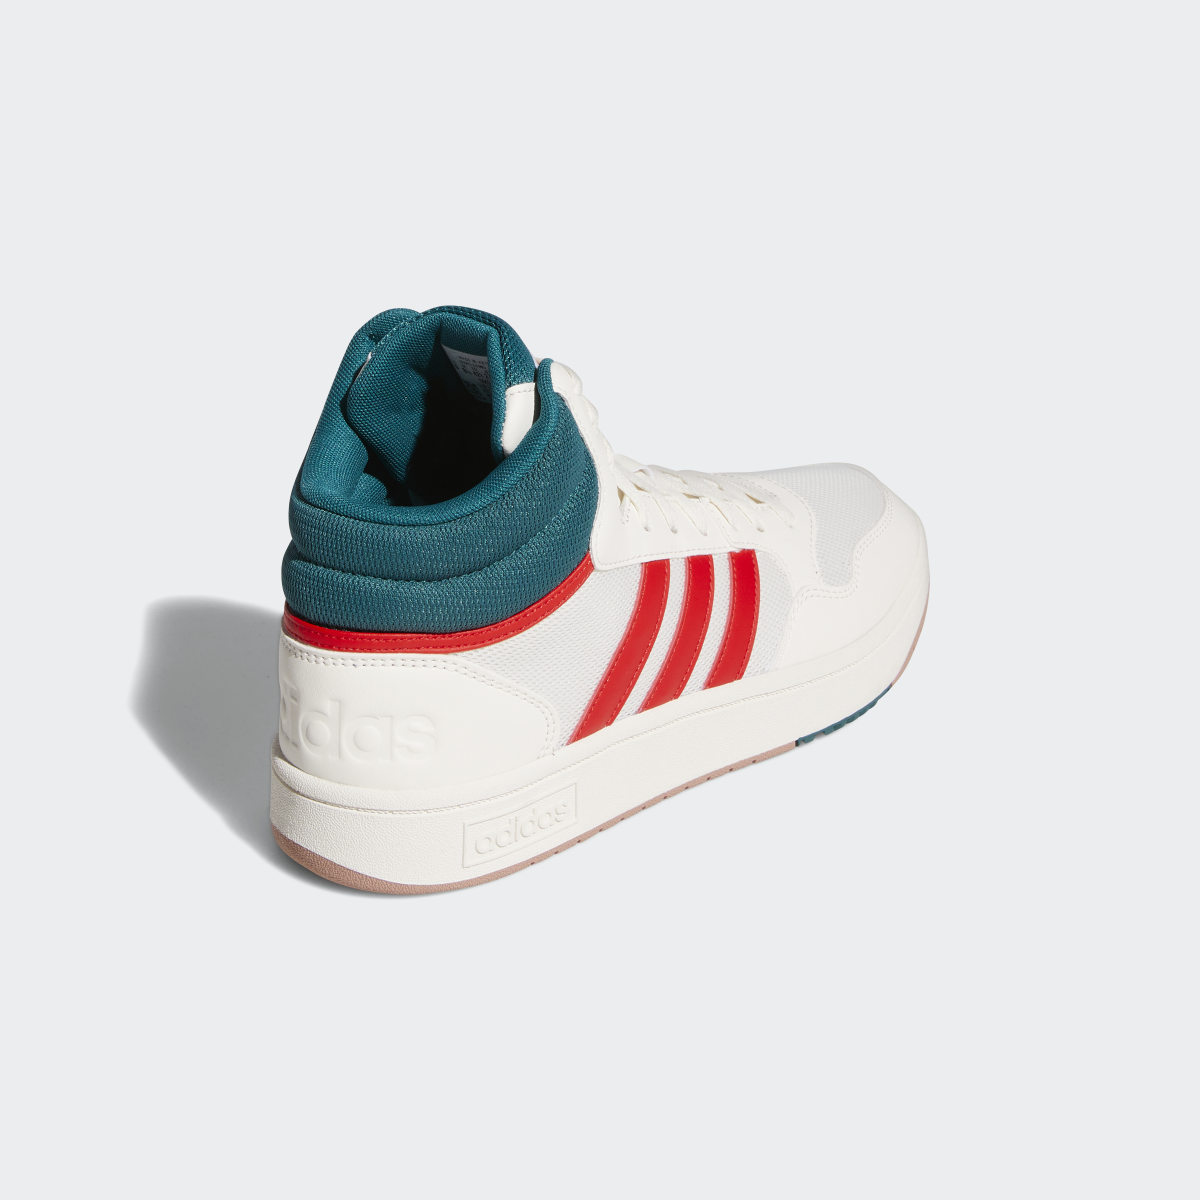 Adidas Hoops 3.0 Mid Shoes. 6